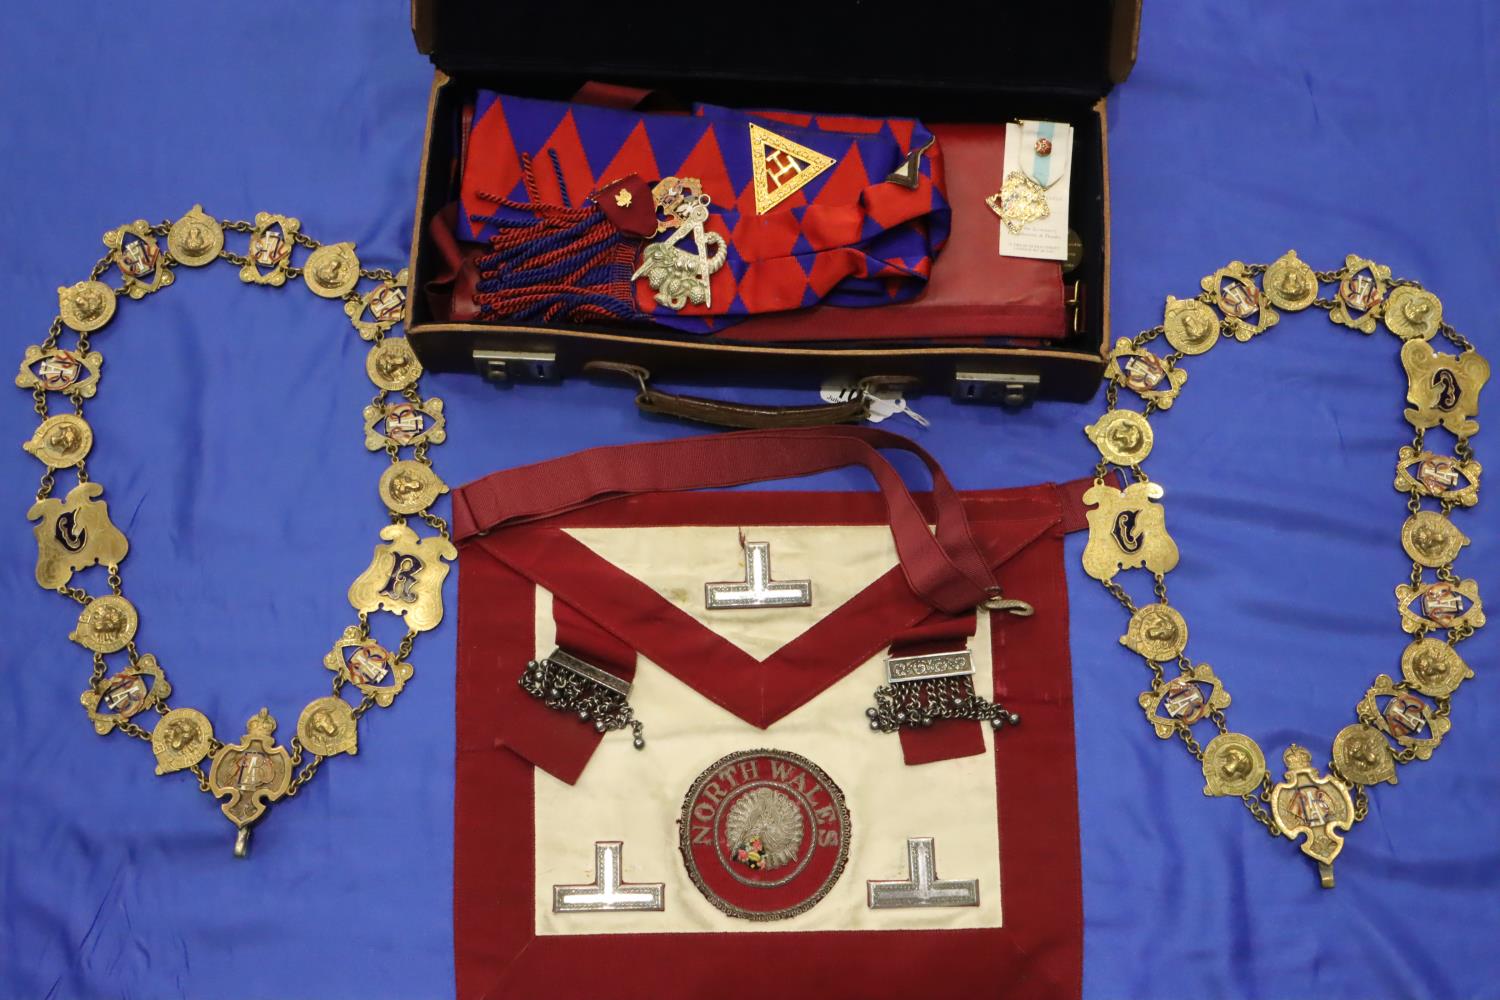 Brown leather regalia case containing Royal Arch apron, sash and jewels. P&P Group 2 (£18+VAT for